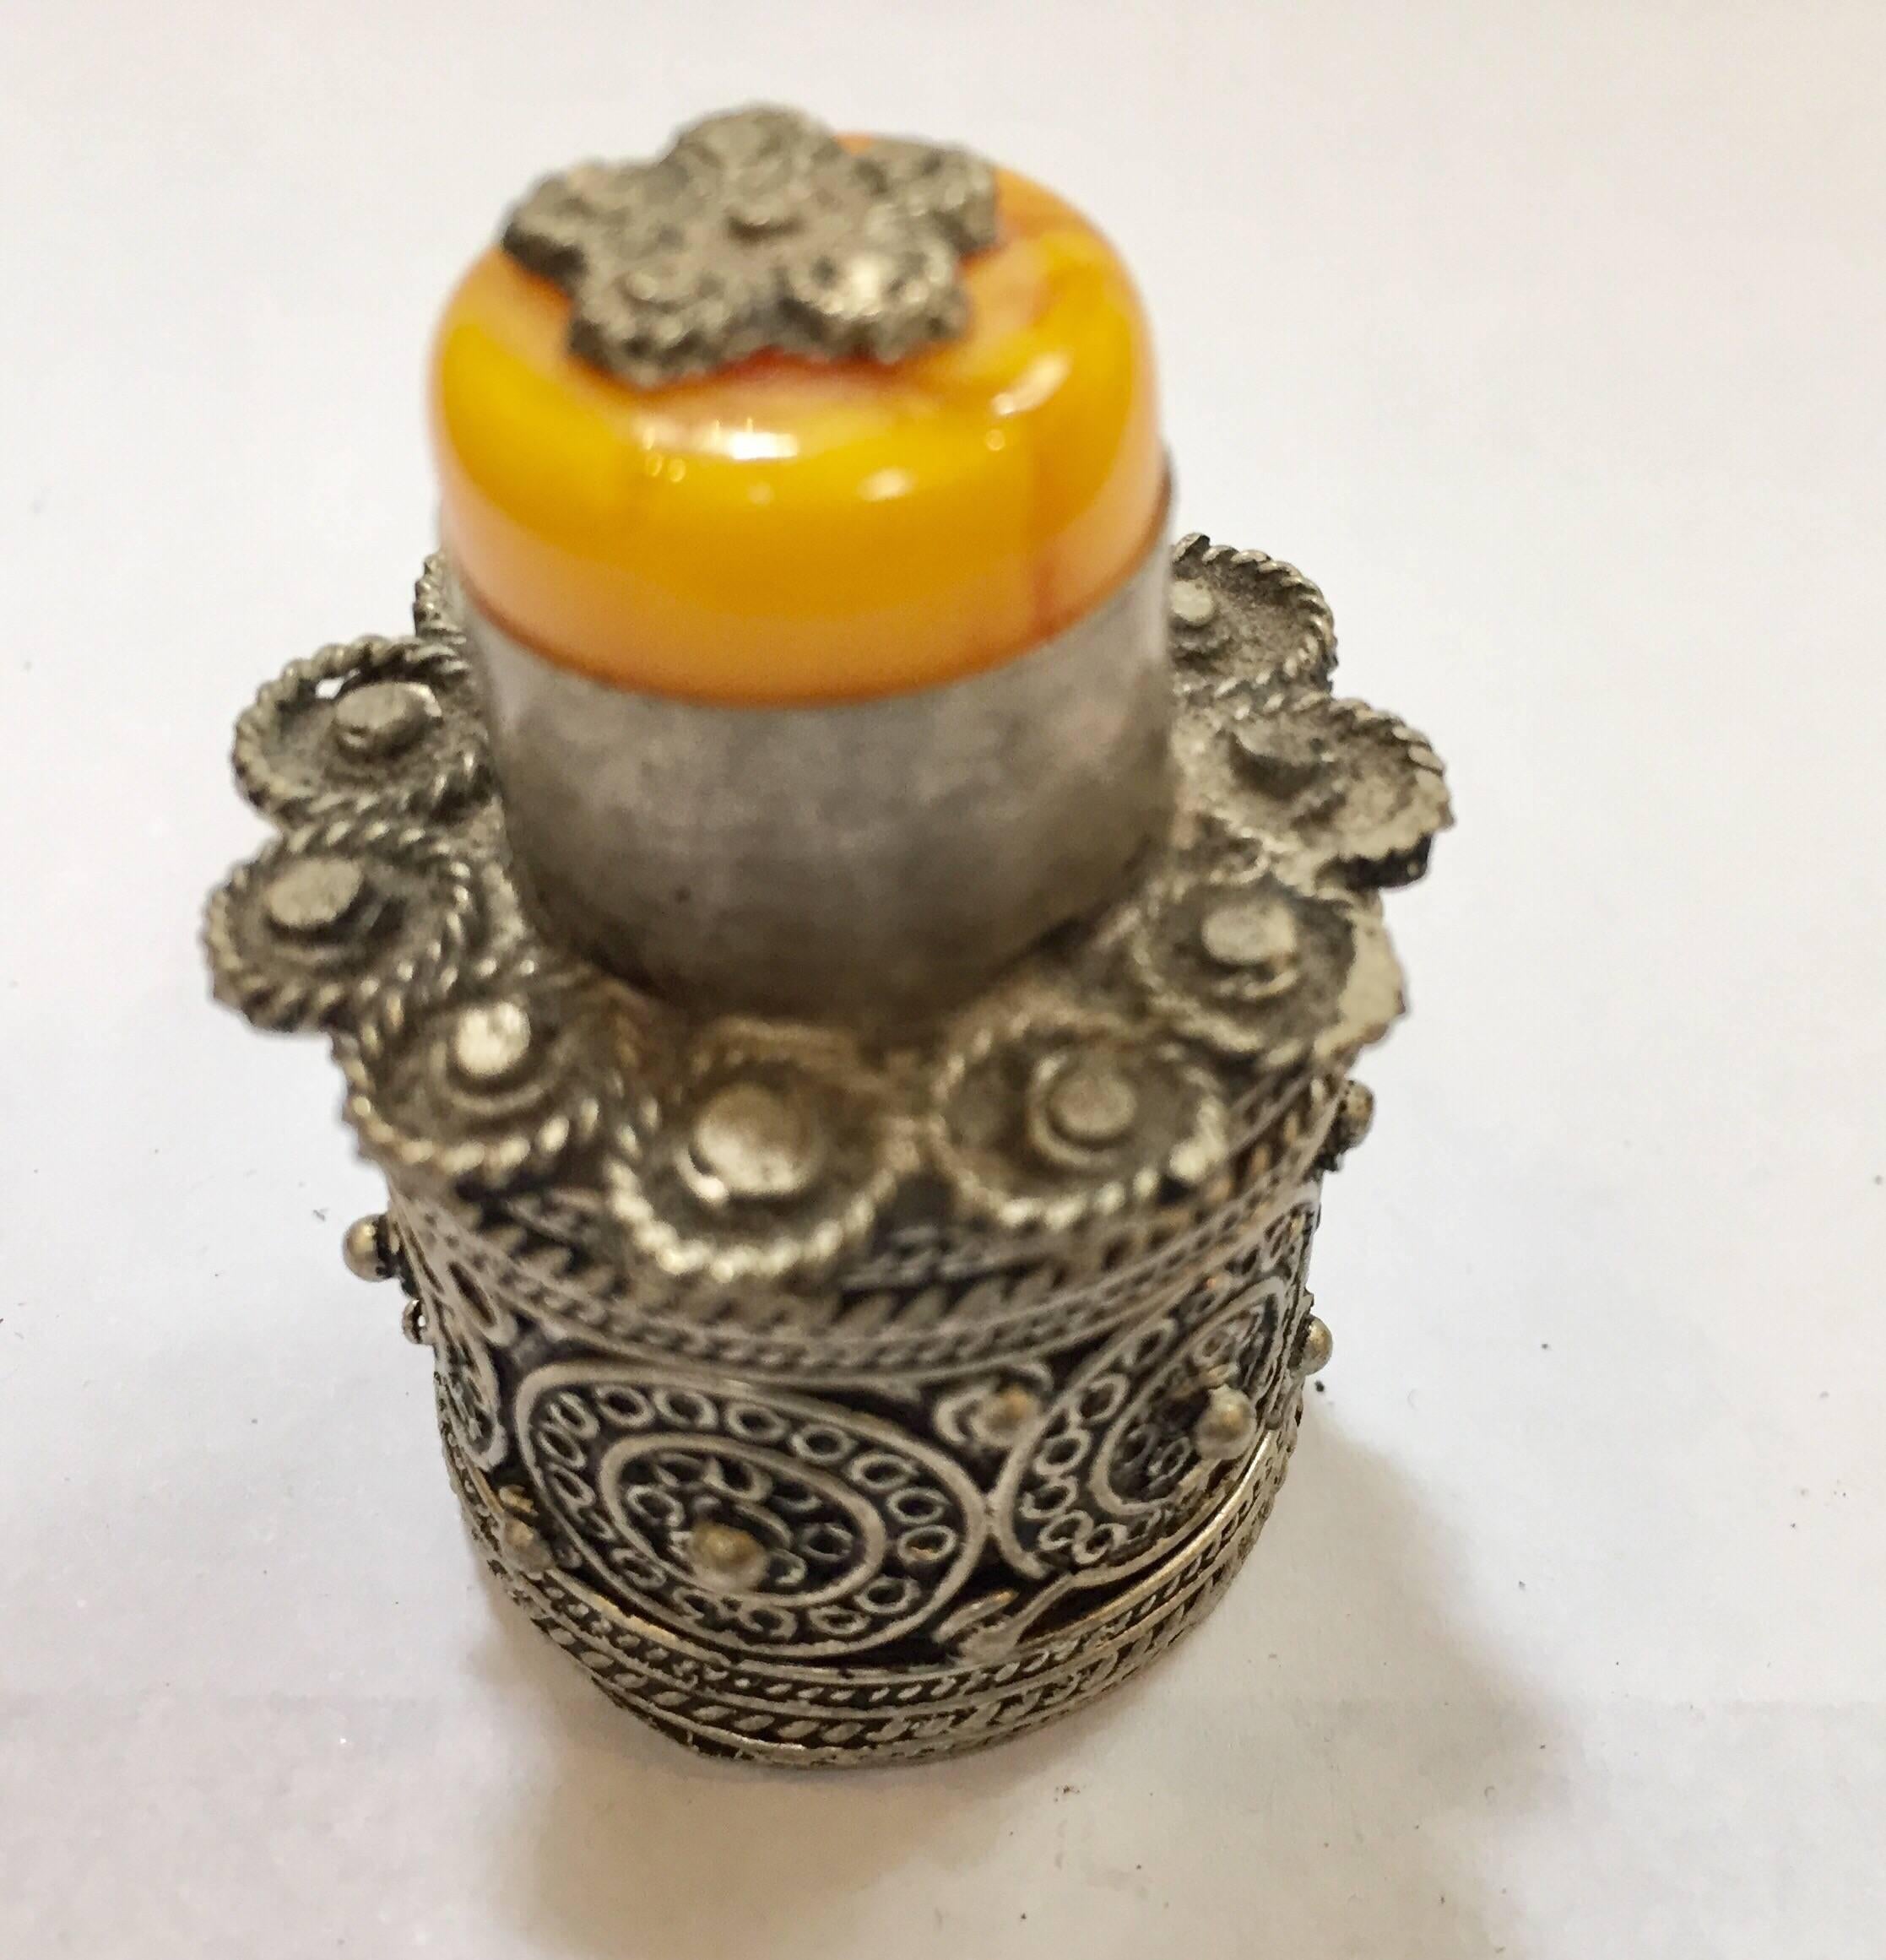 Silvered metal lidded box of a circular form for powder kohl eye liner.
Designed into two detached sections, finely handcrafted and decorated with scrollwork designs with a yellow amber stone on the top lid and lots of great detail.
Berber Kabyle